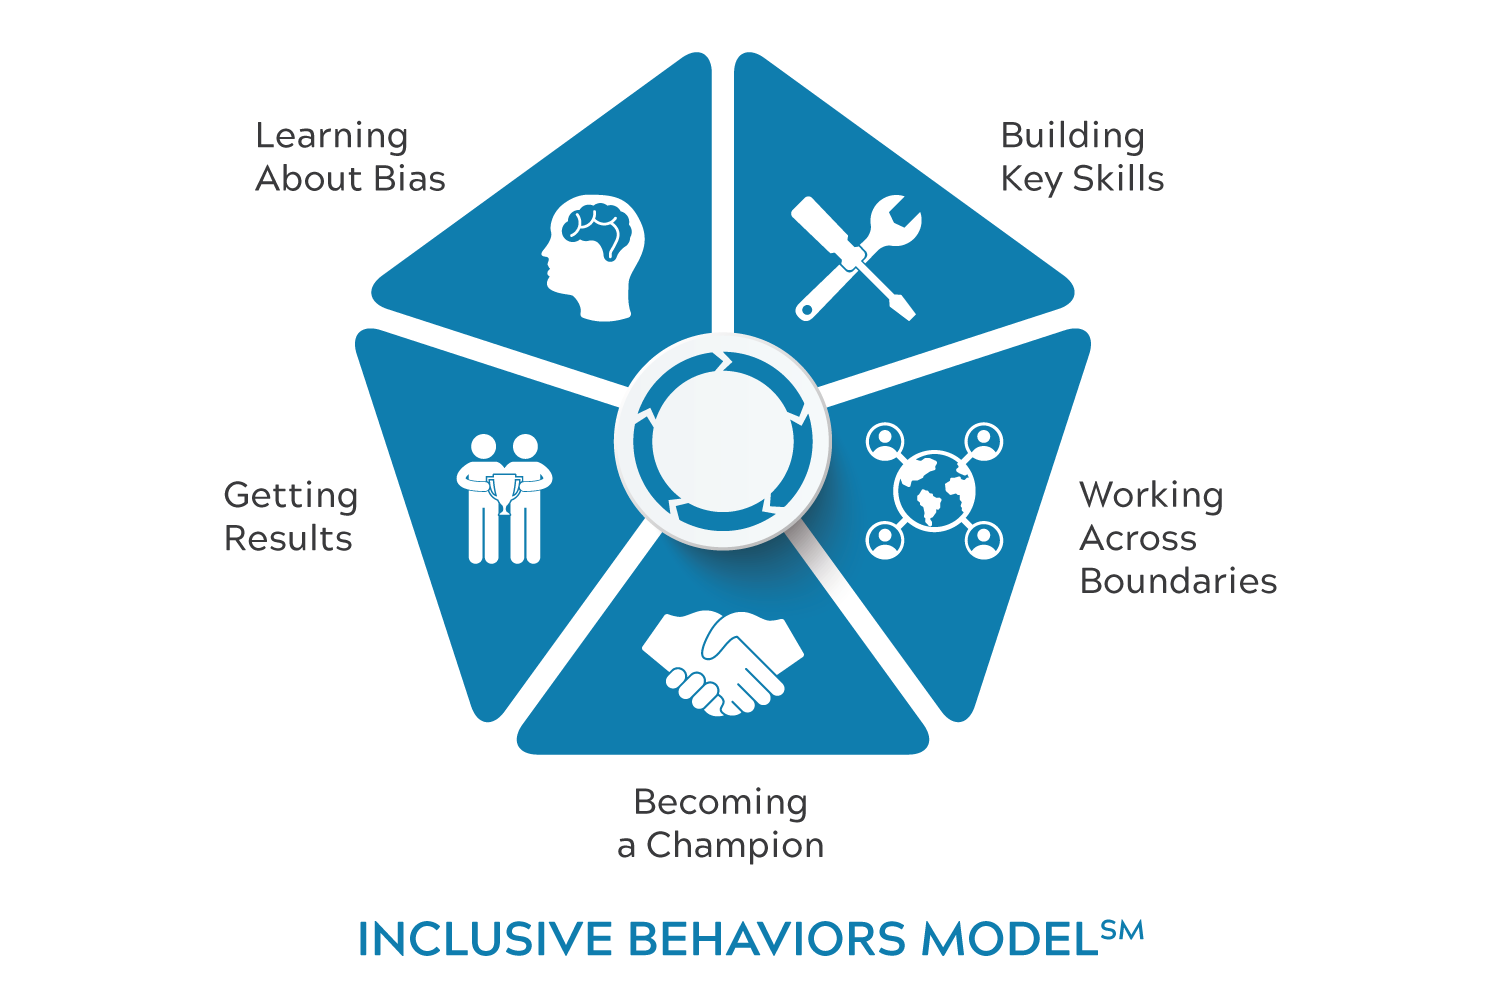 Learn Five Dimensions of Inclusion with the Inclusive Behaviors Model